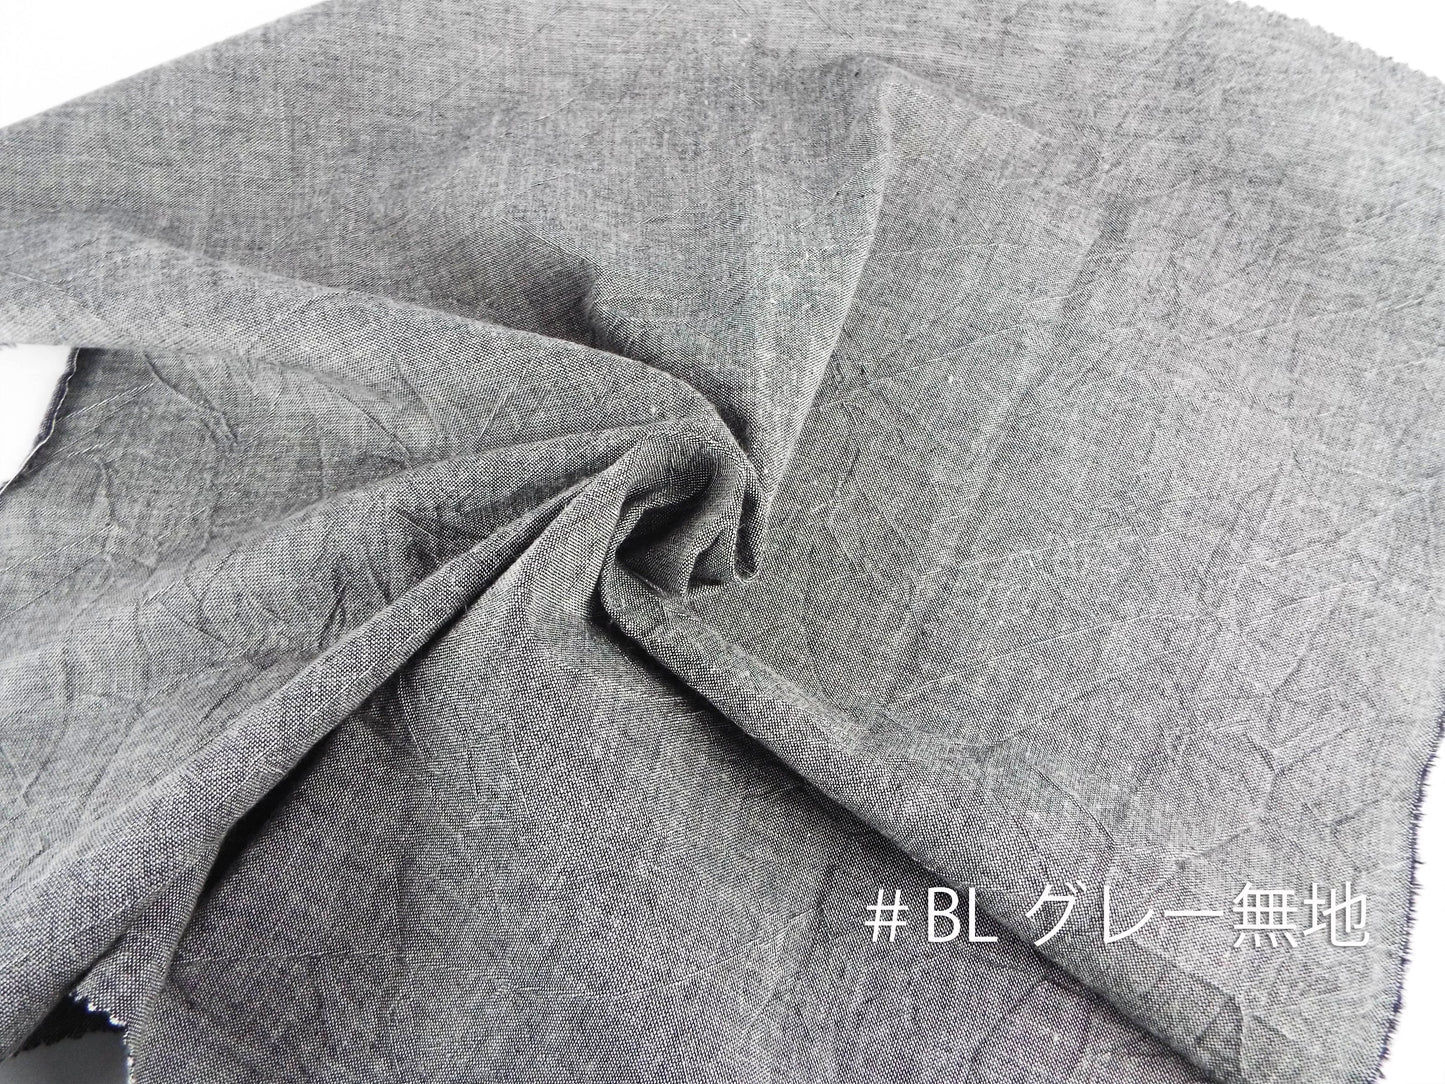 Kameda striped cotton fabric BL plain gray plain wrinkle processing thick fabric goes well with jeans